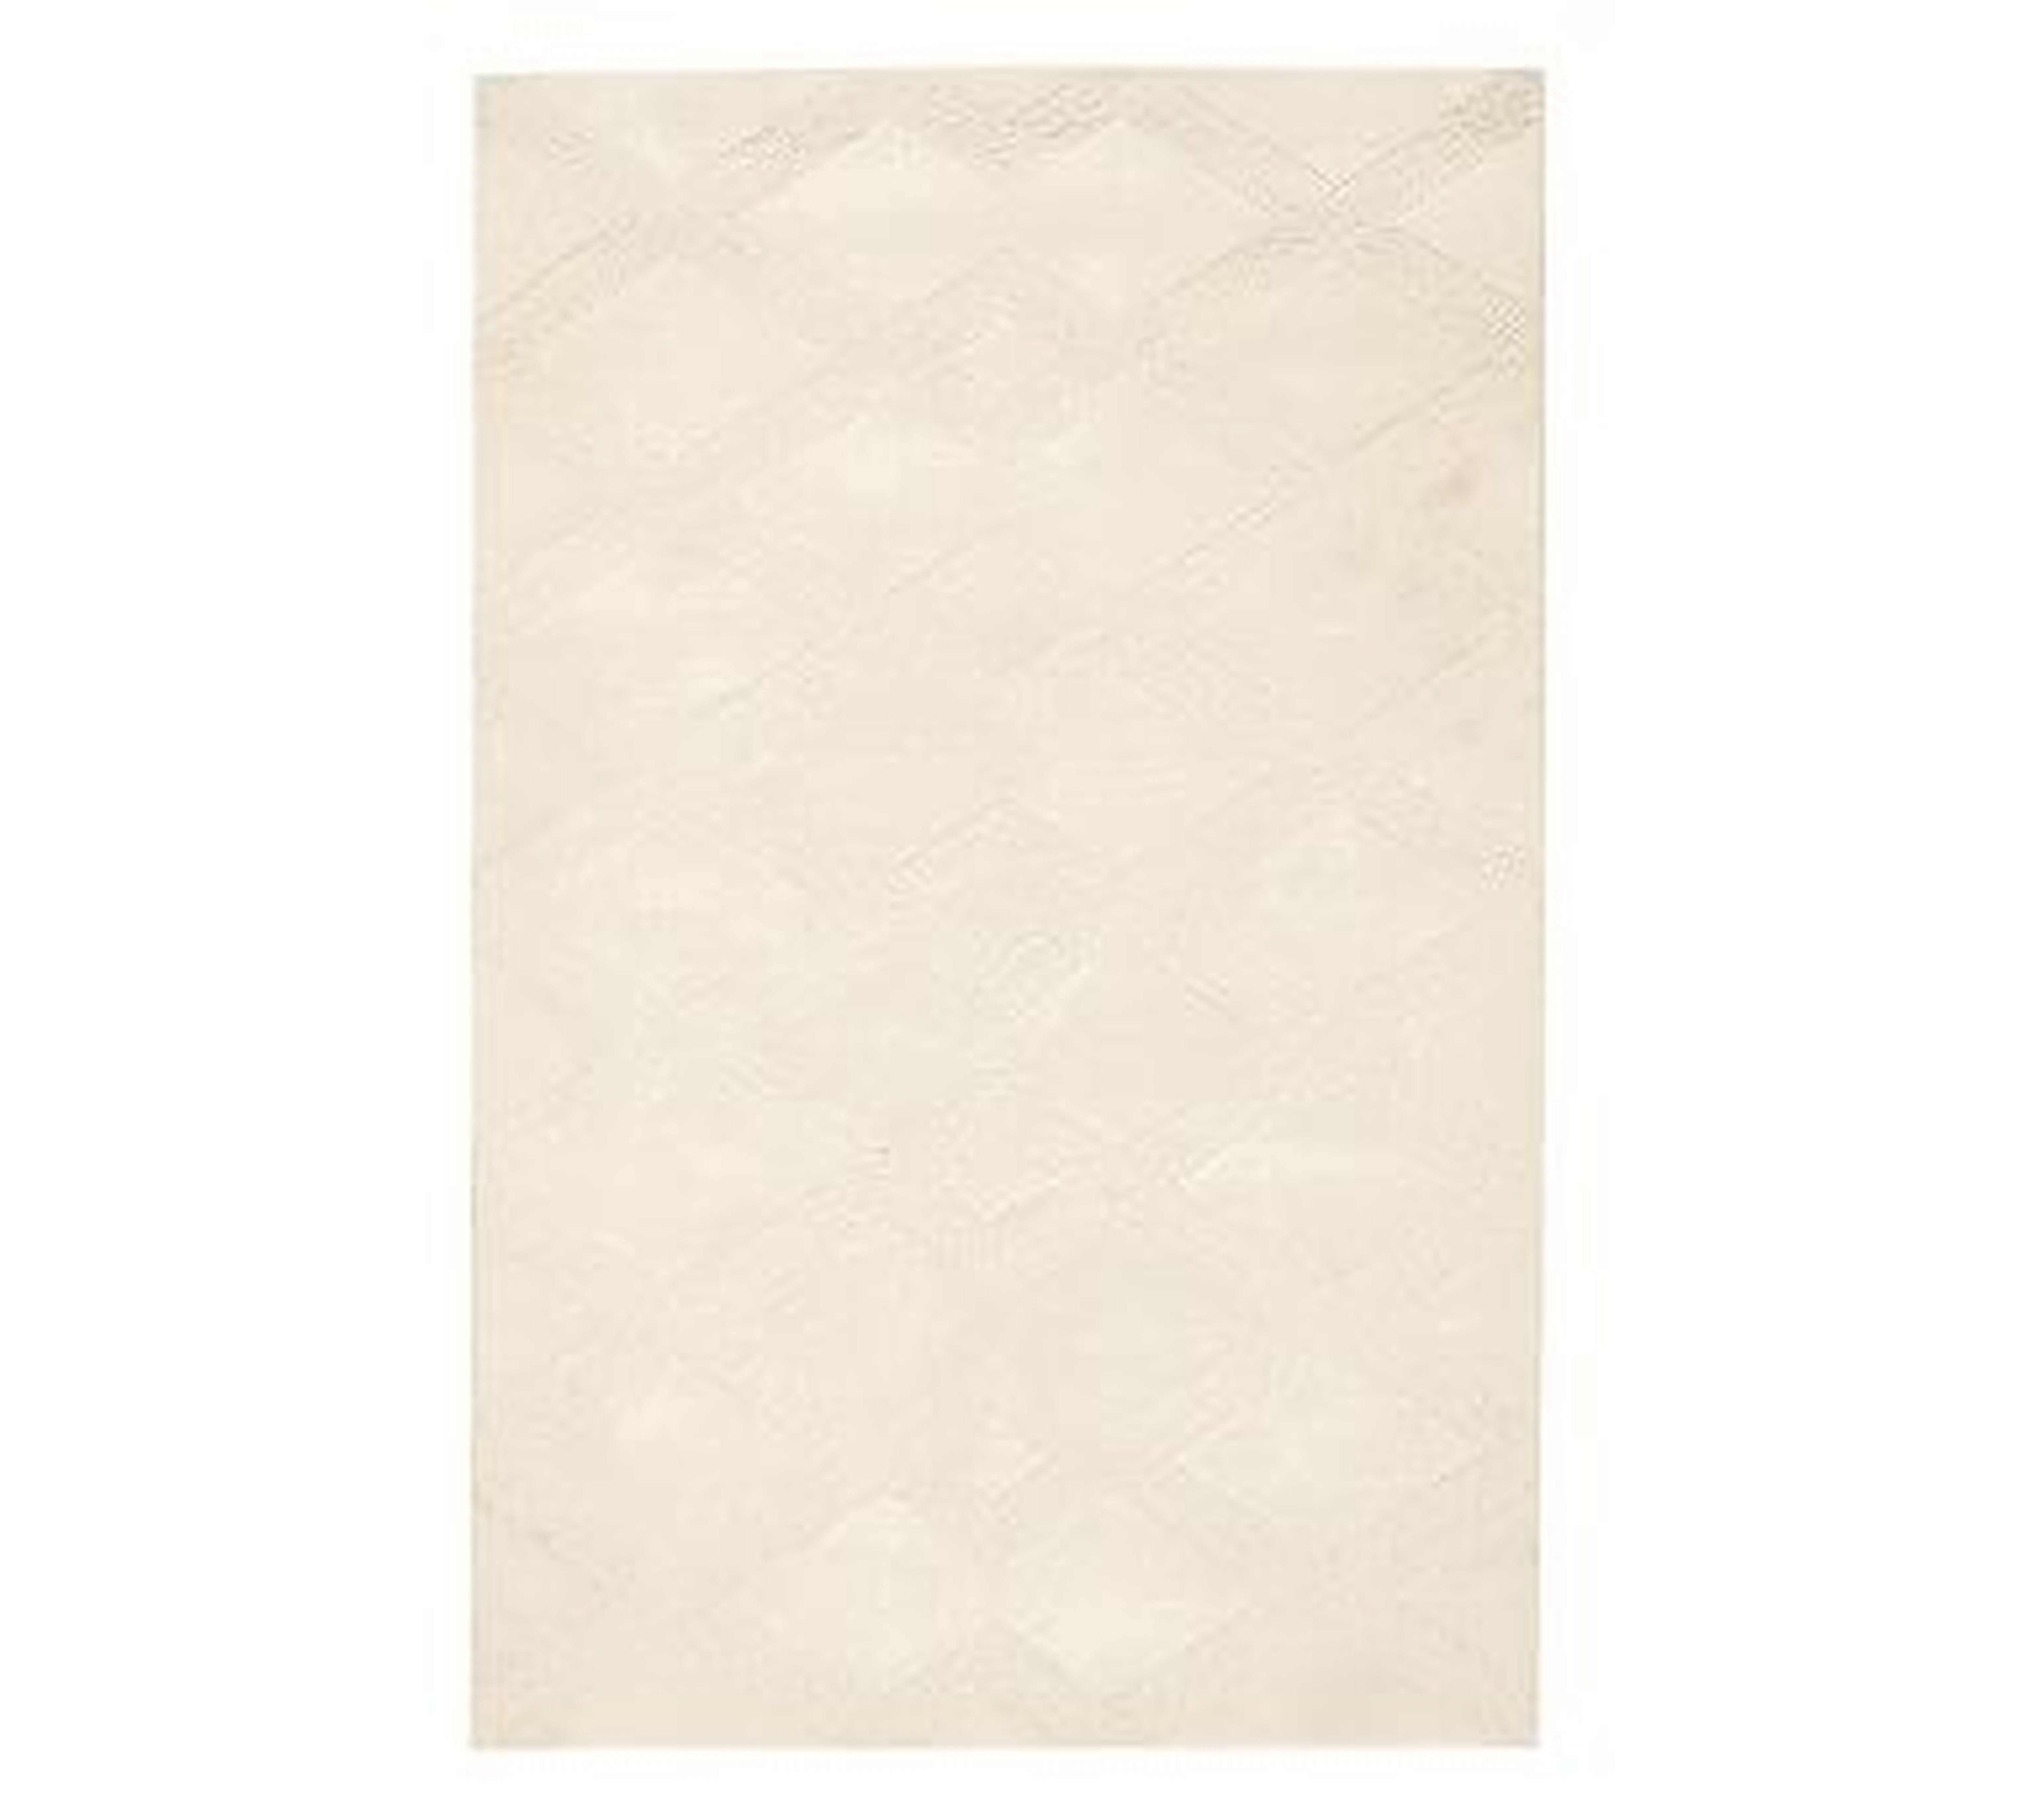 Chase Textured Hand Tufted Wool Rug, 8 x 10', Ivory - Pottery Barn